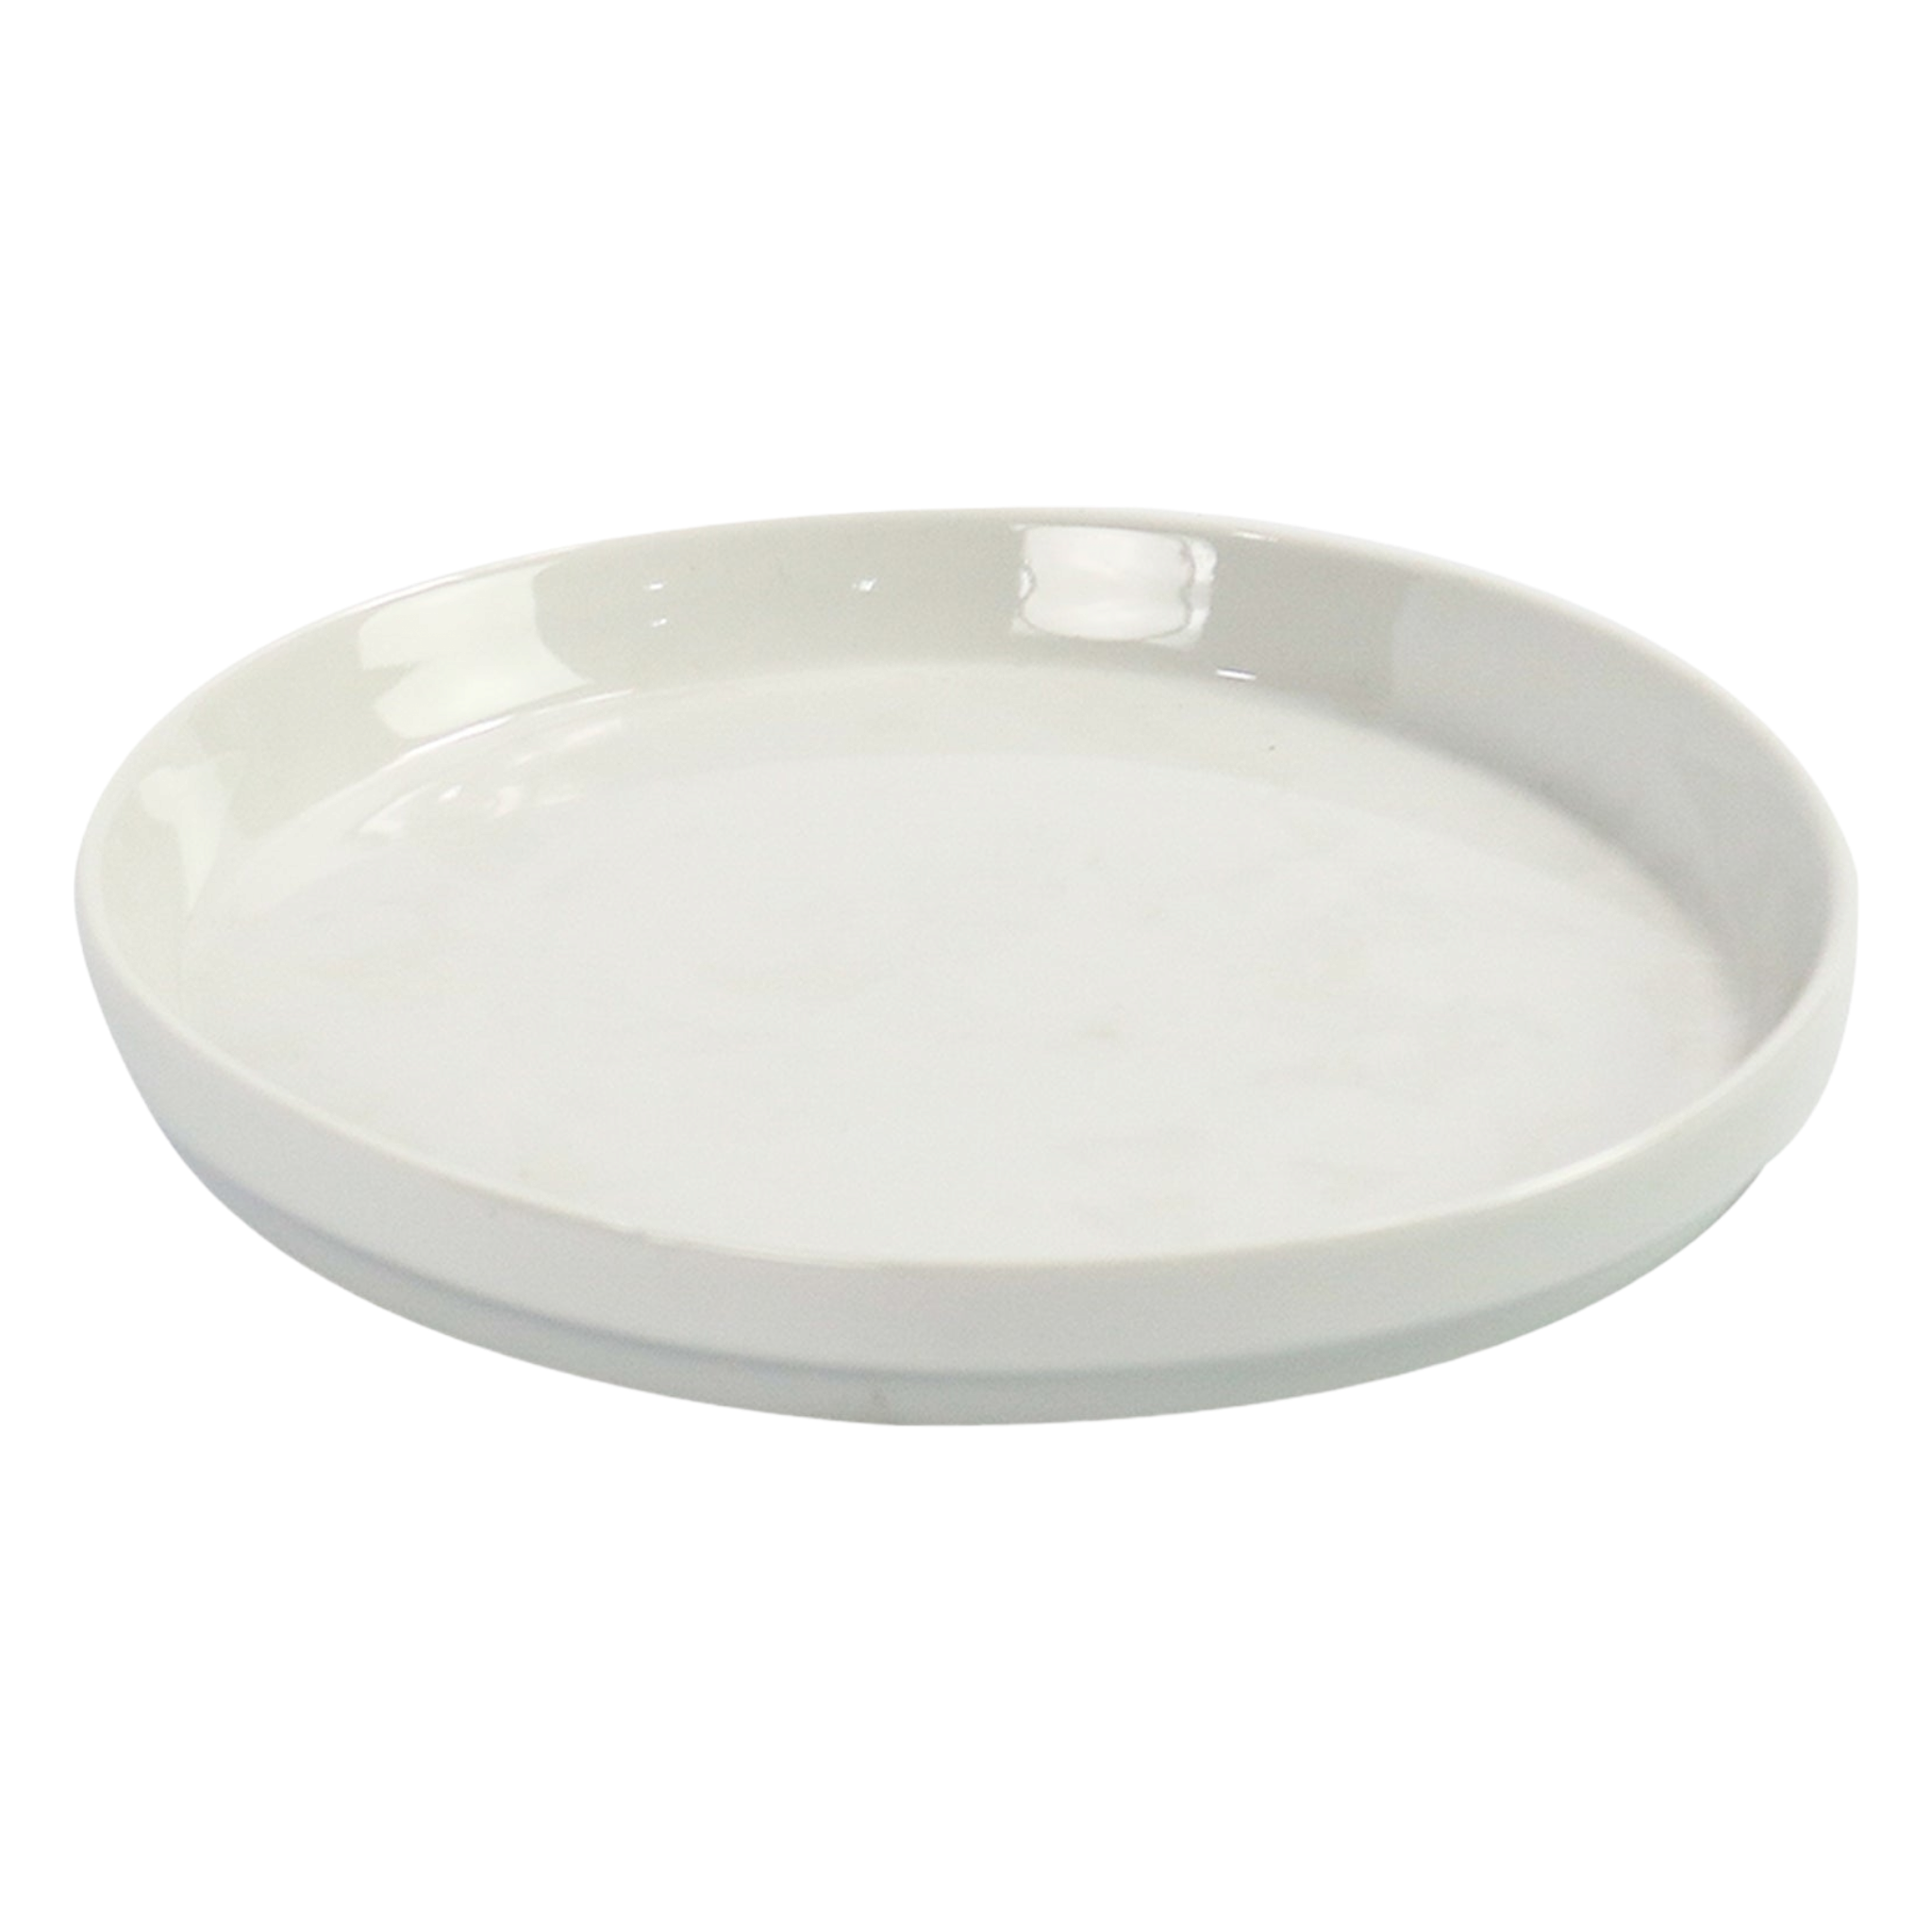 20cm Porcelain Side Plate Round Straight Edge SGN2026